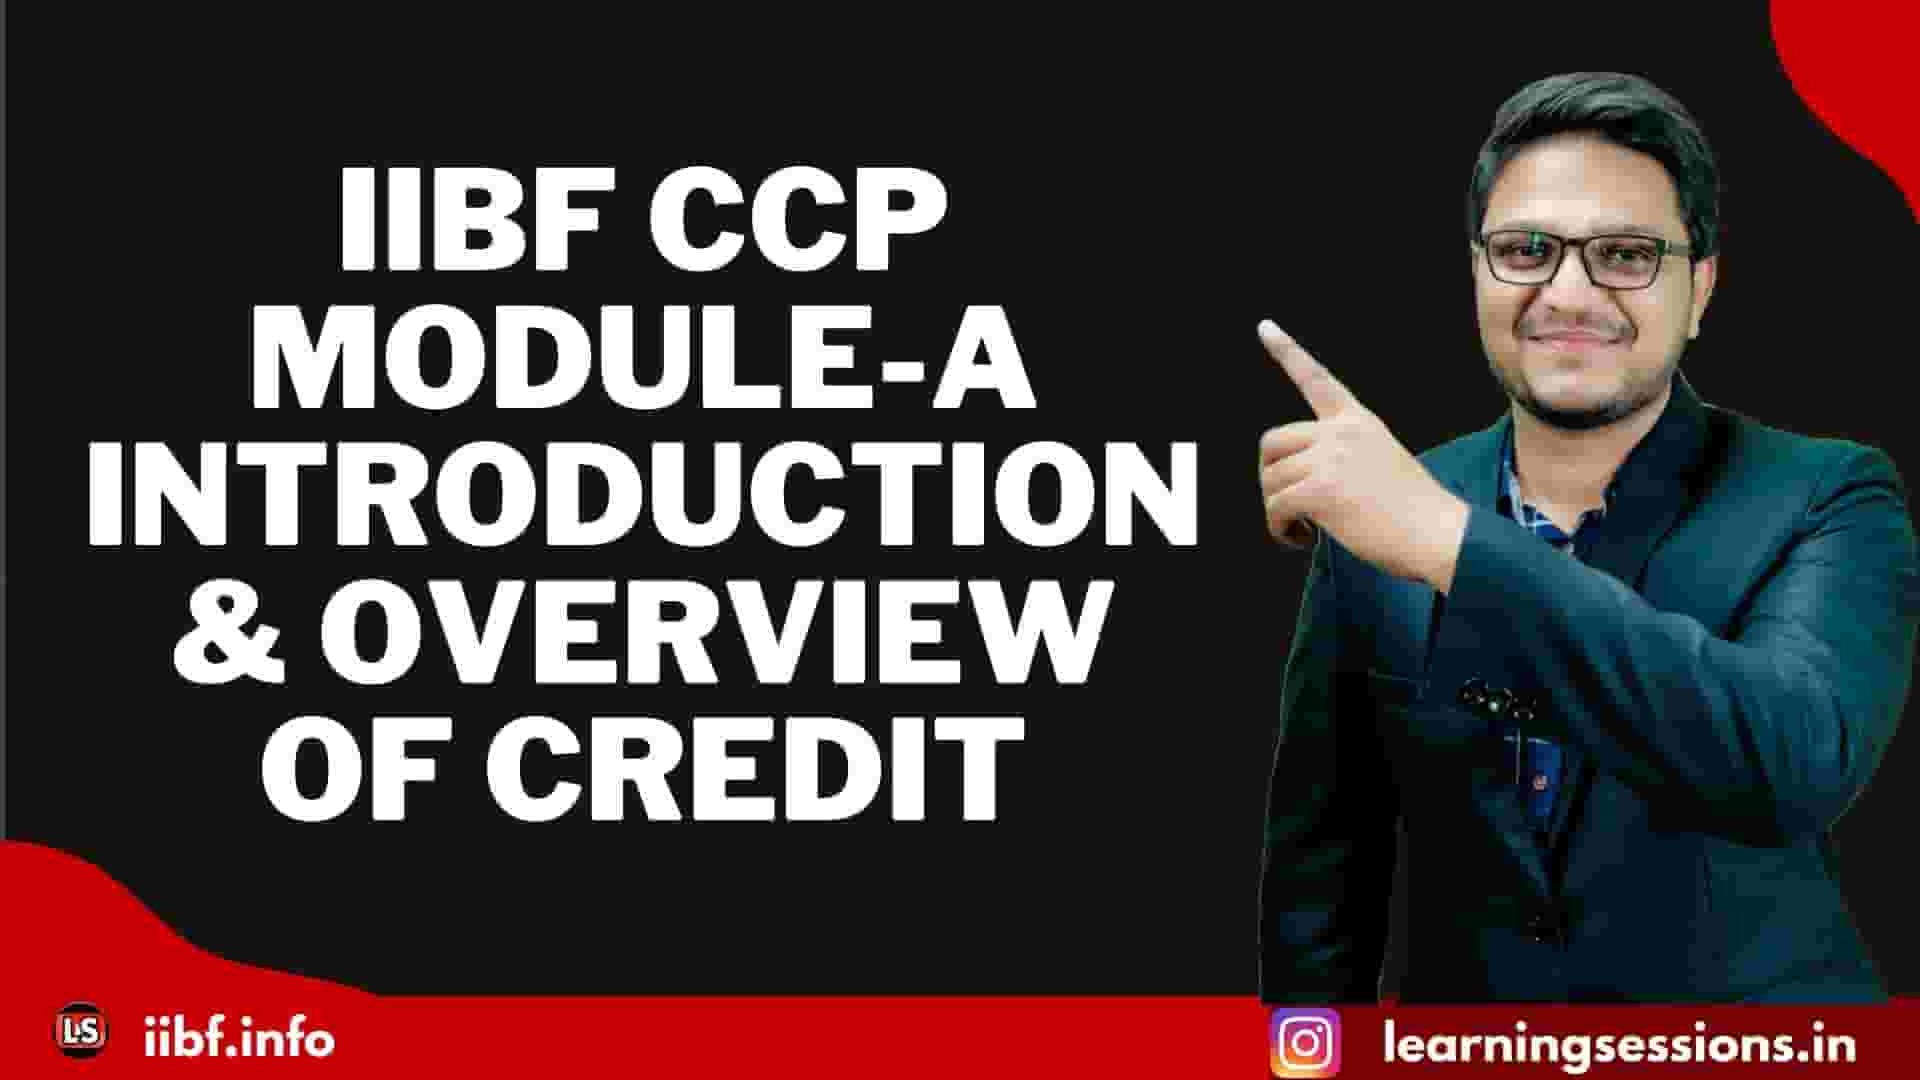 IIBF CCP MODULE-A: INTRODUCTION & OVERVIEW OF CREDIT